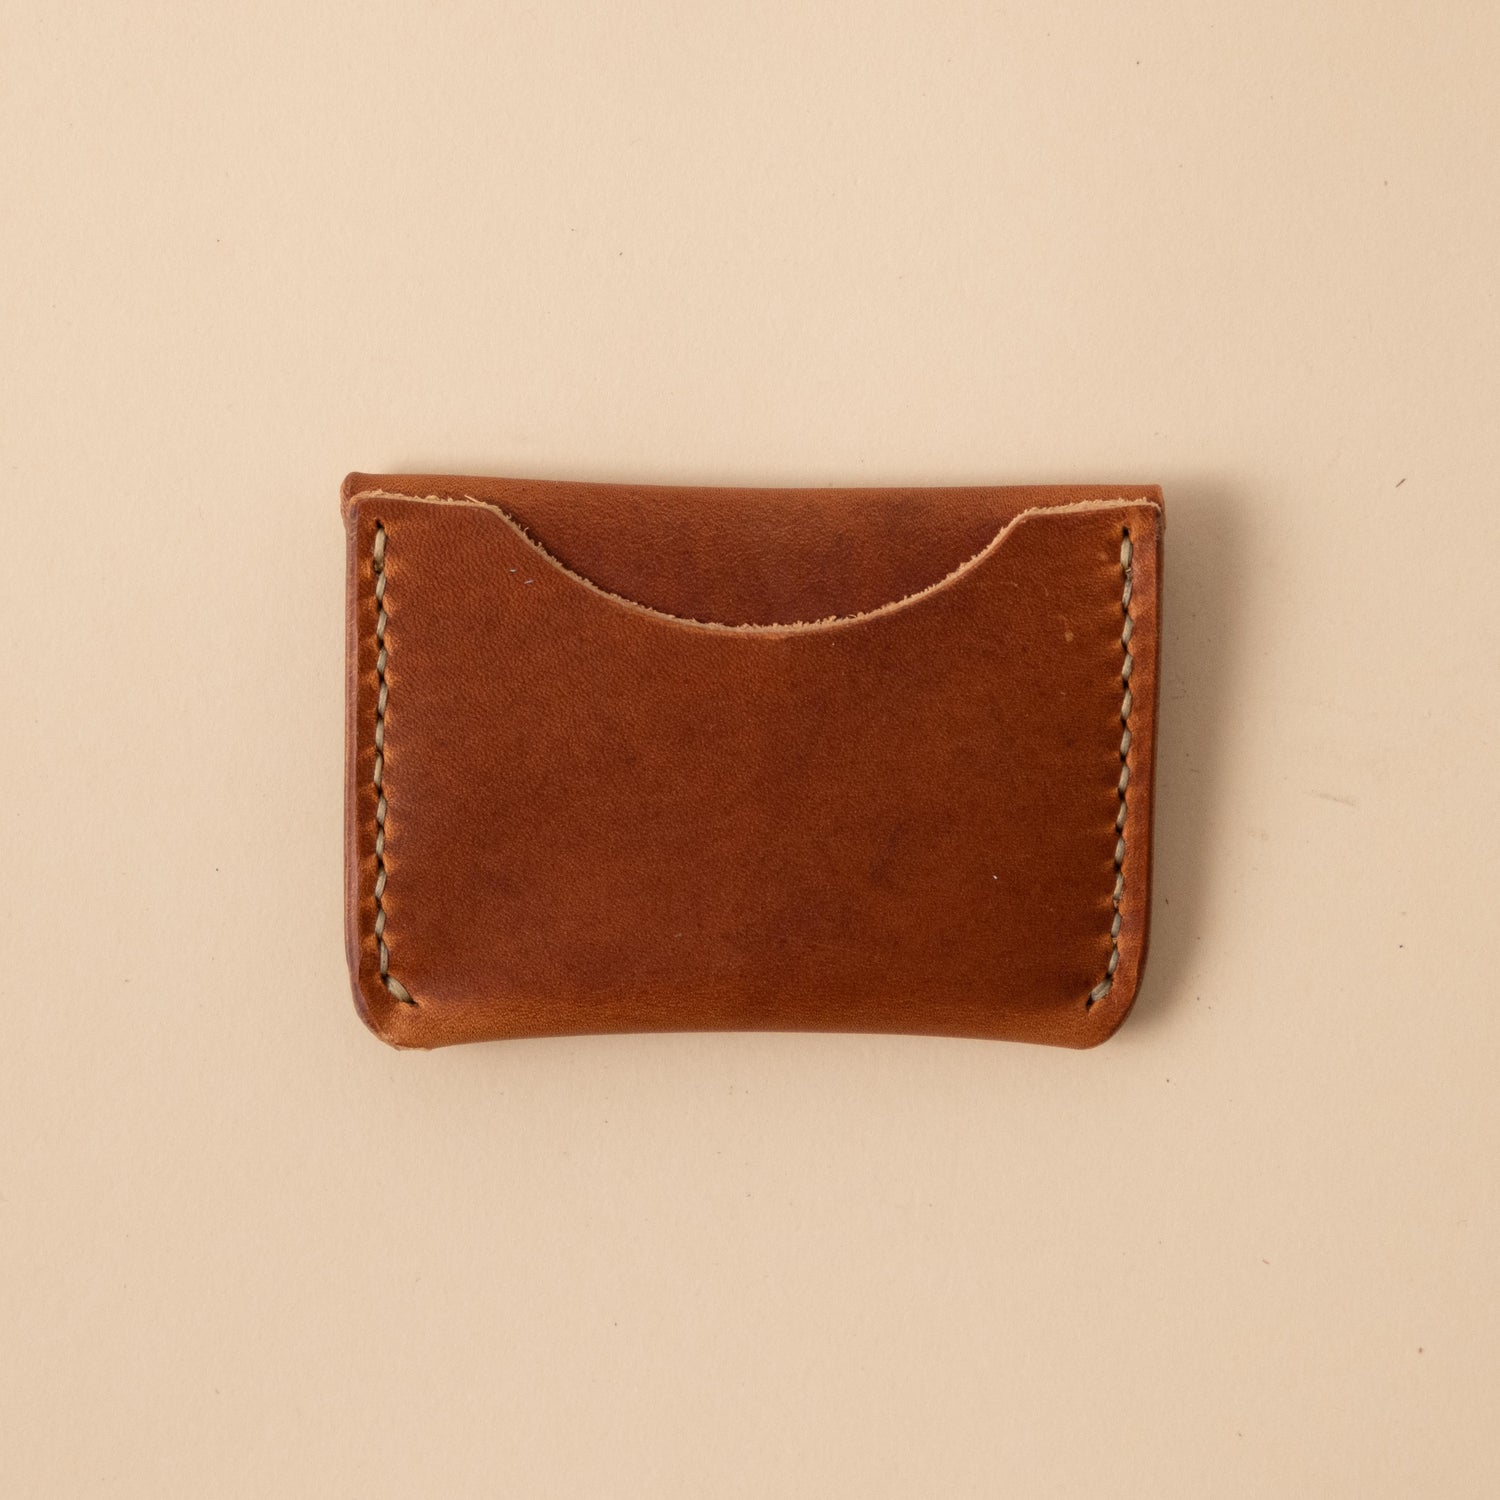 English Tan Dublin Flap Wallet- mens leather wallet - handmade leather wallets at KMM &amp; Co.